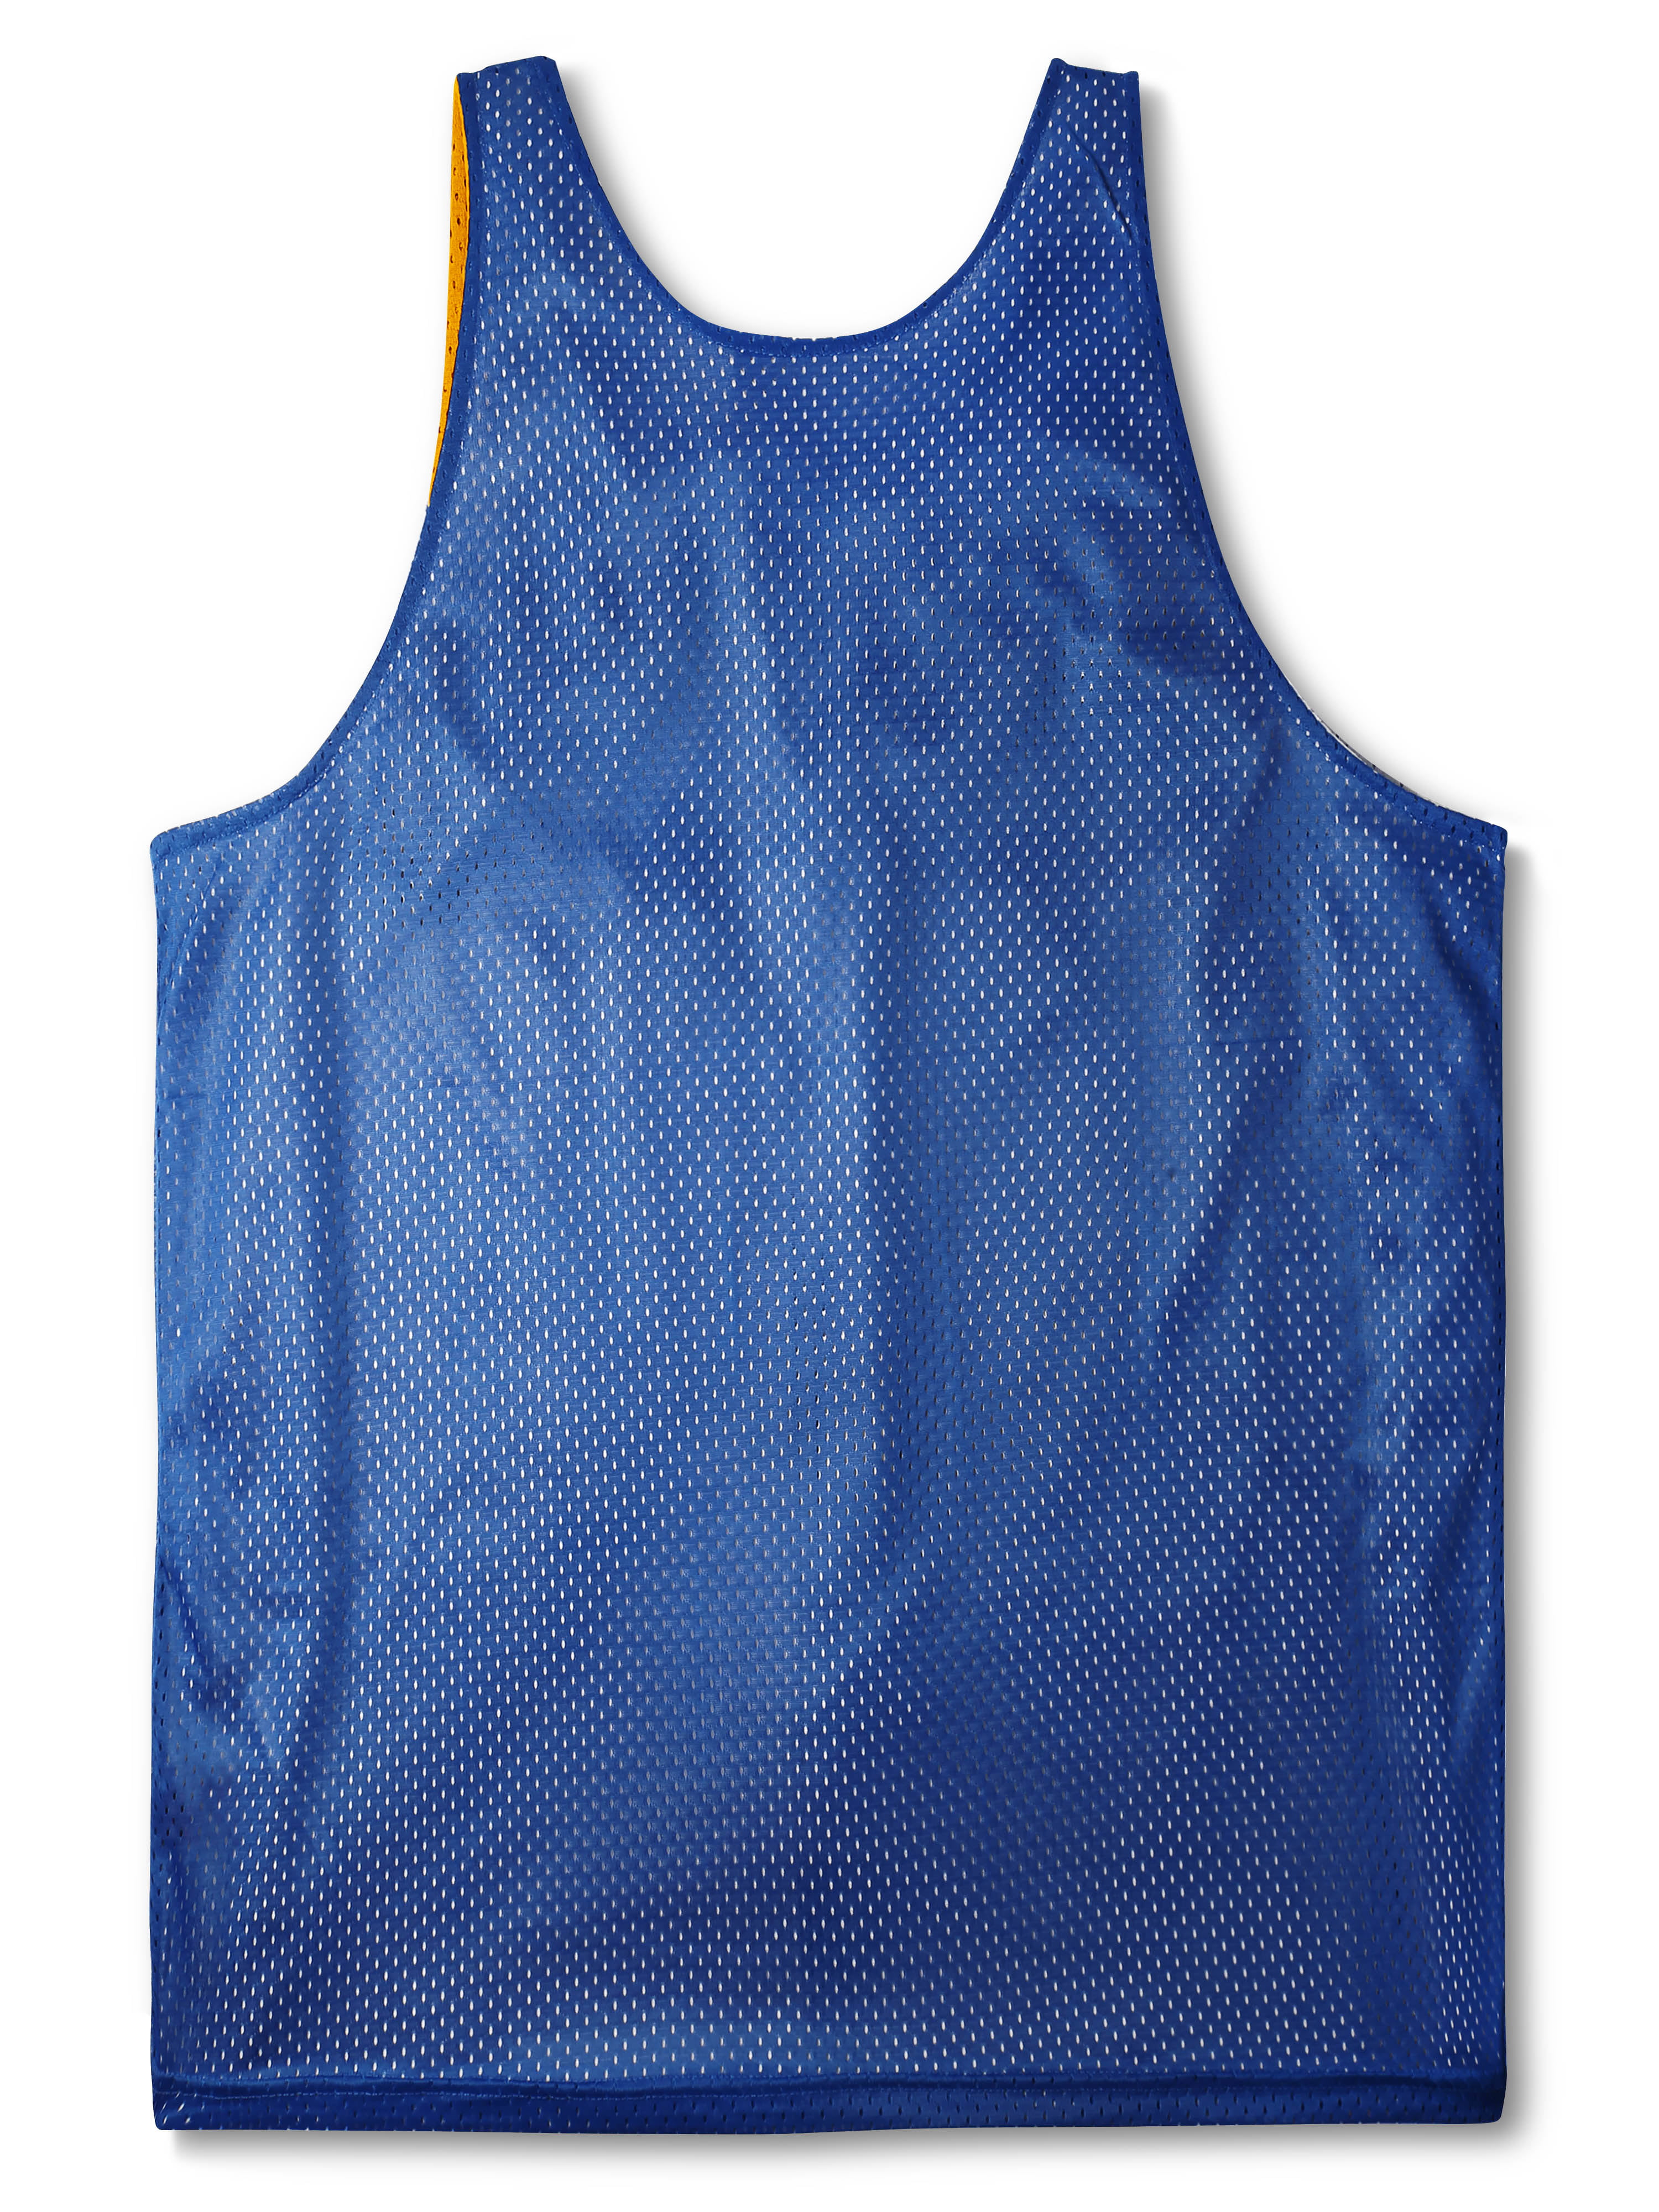 Ma Croix Mens Reversible Mesh Basketball Jersey Quick Drying Sleeveless Tank Top Made in USA 